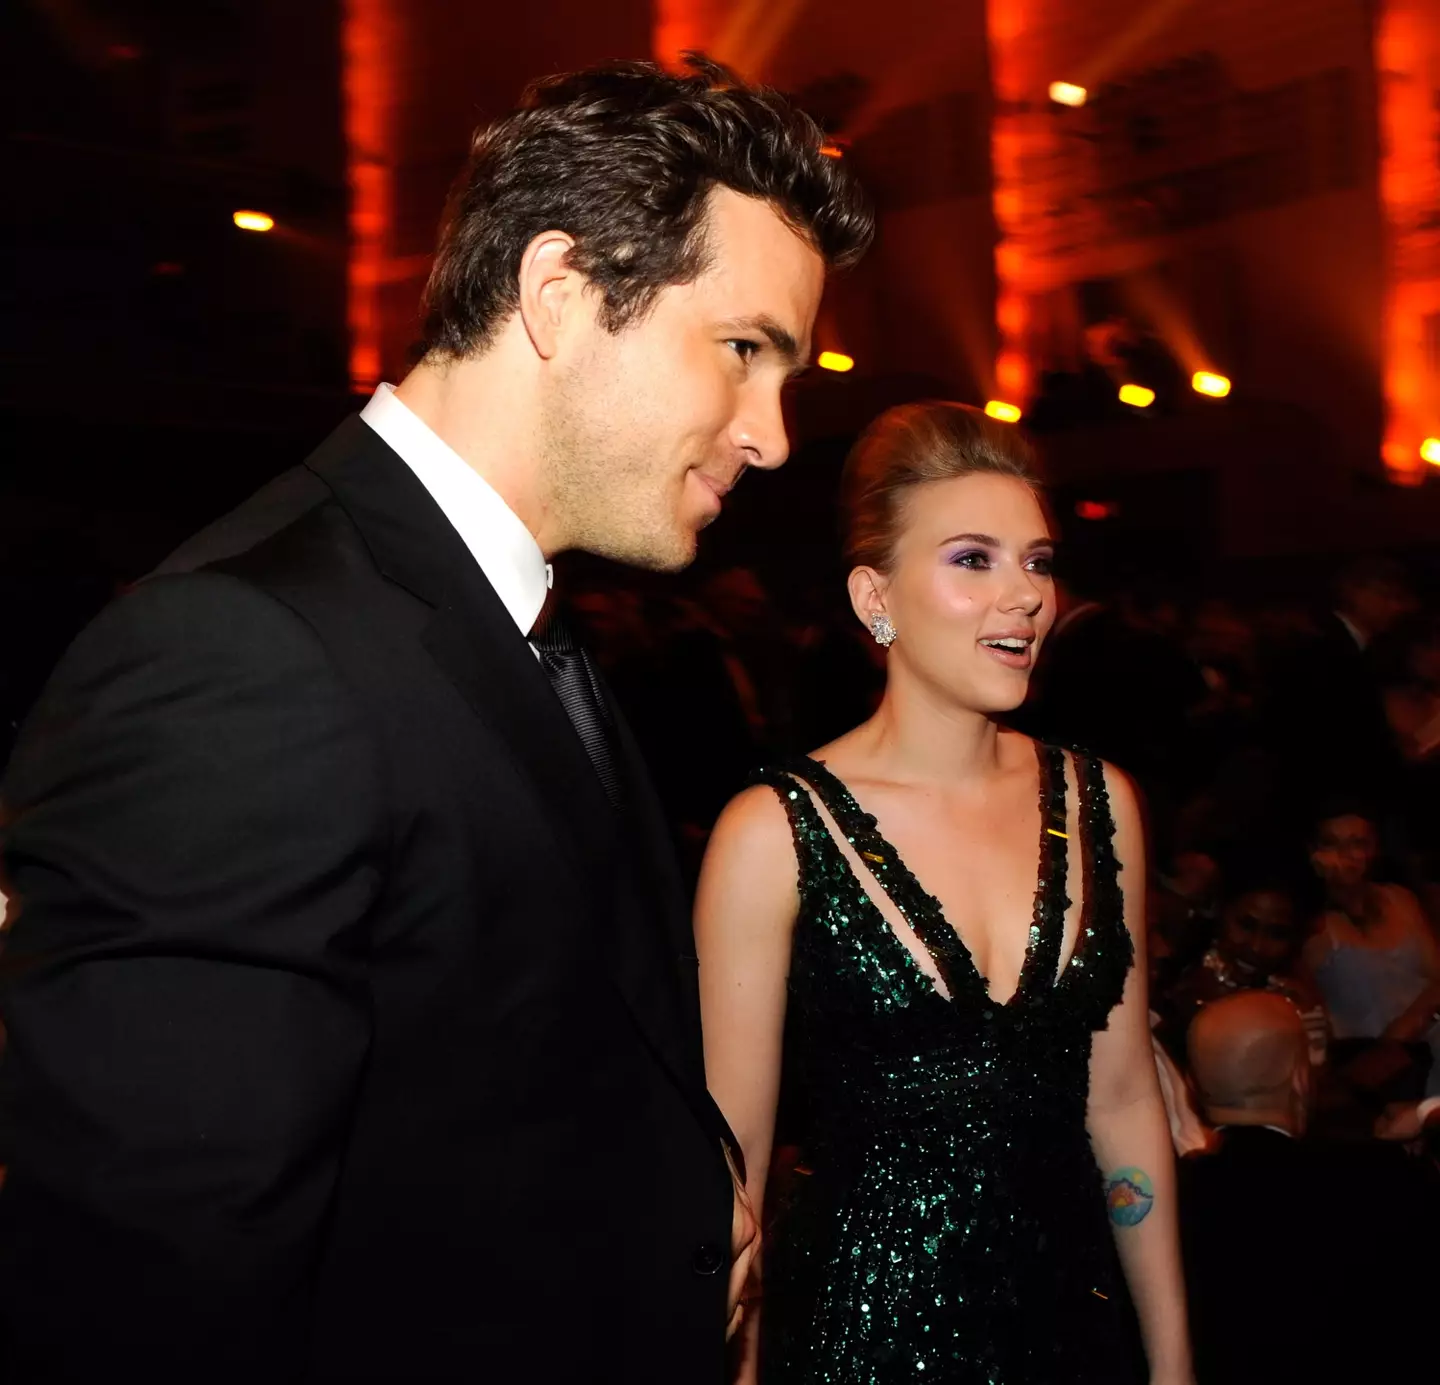 Scarlett Johansson and Ryan Reynolds got married in 2008 but their romance was short-lived.